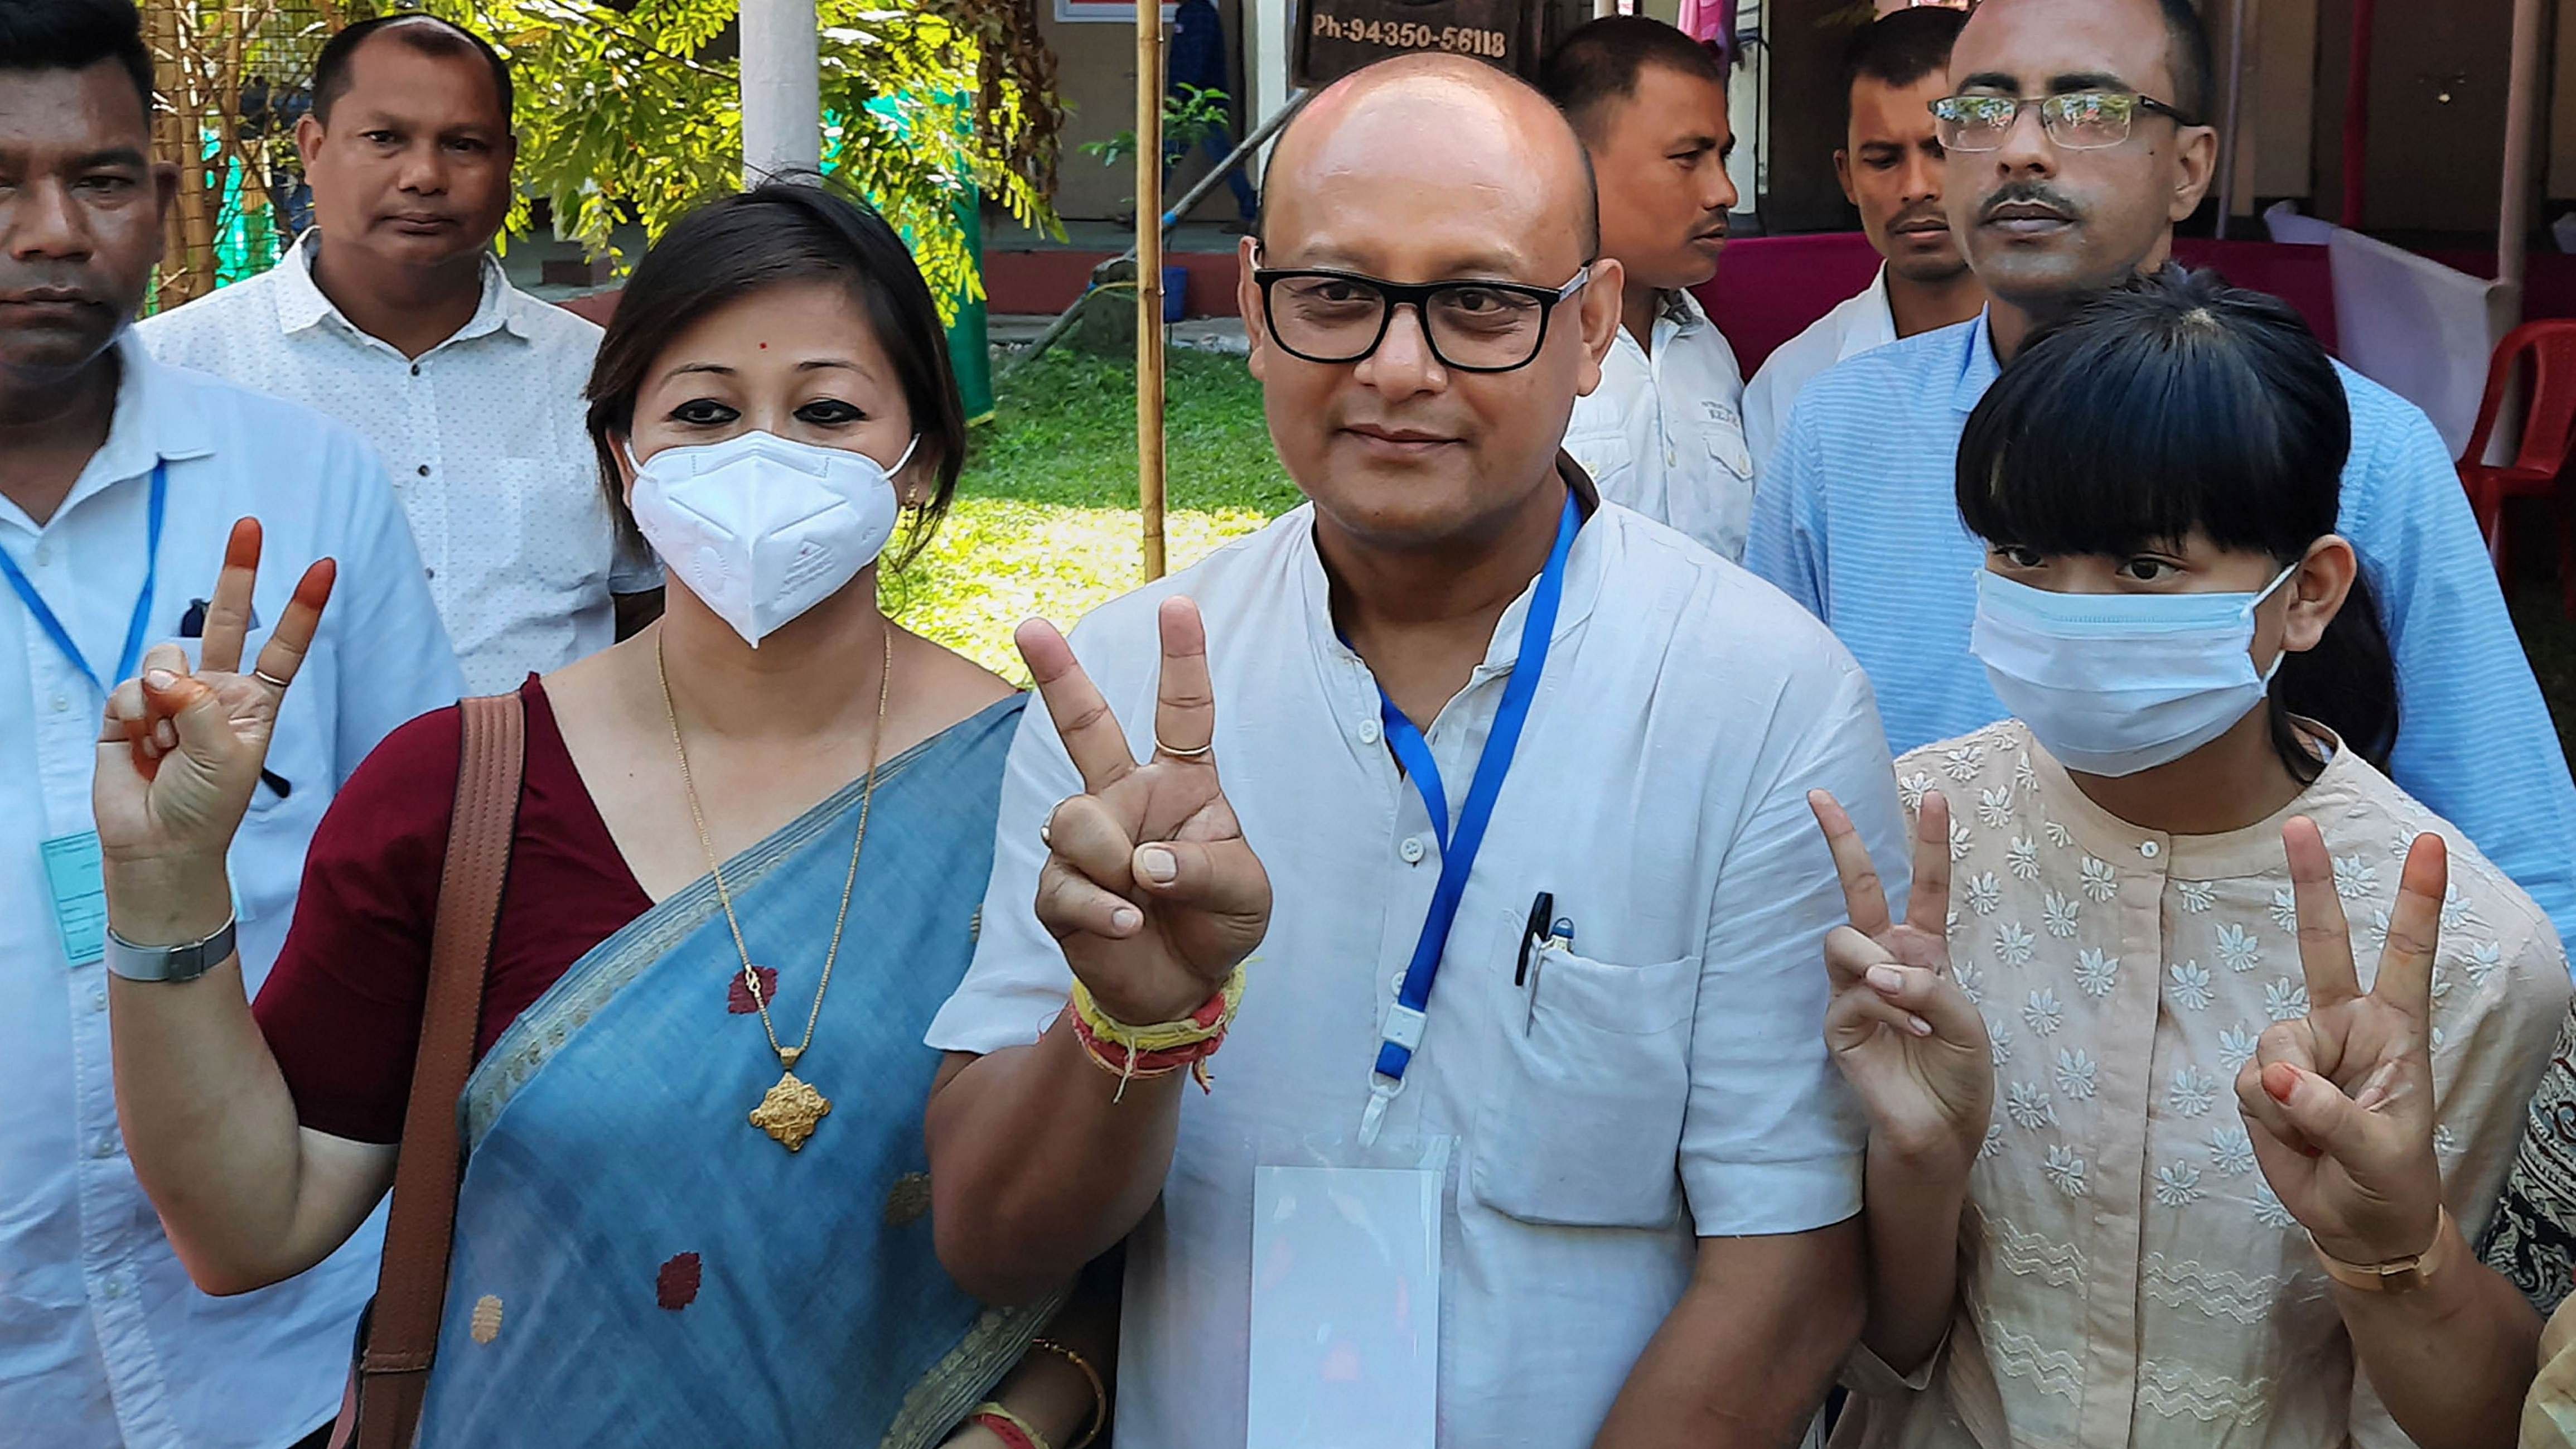  BJP candidate from Thowra constituency Sushanta Borgohain (C) with family members flash victory sign after winning in assembly by-elections, in Sivasagar district. Credit: PTI Photo